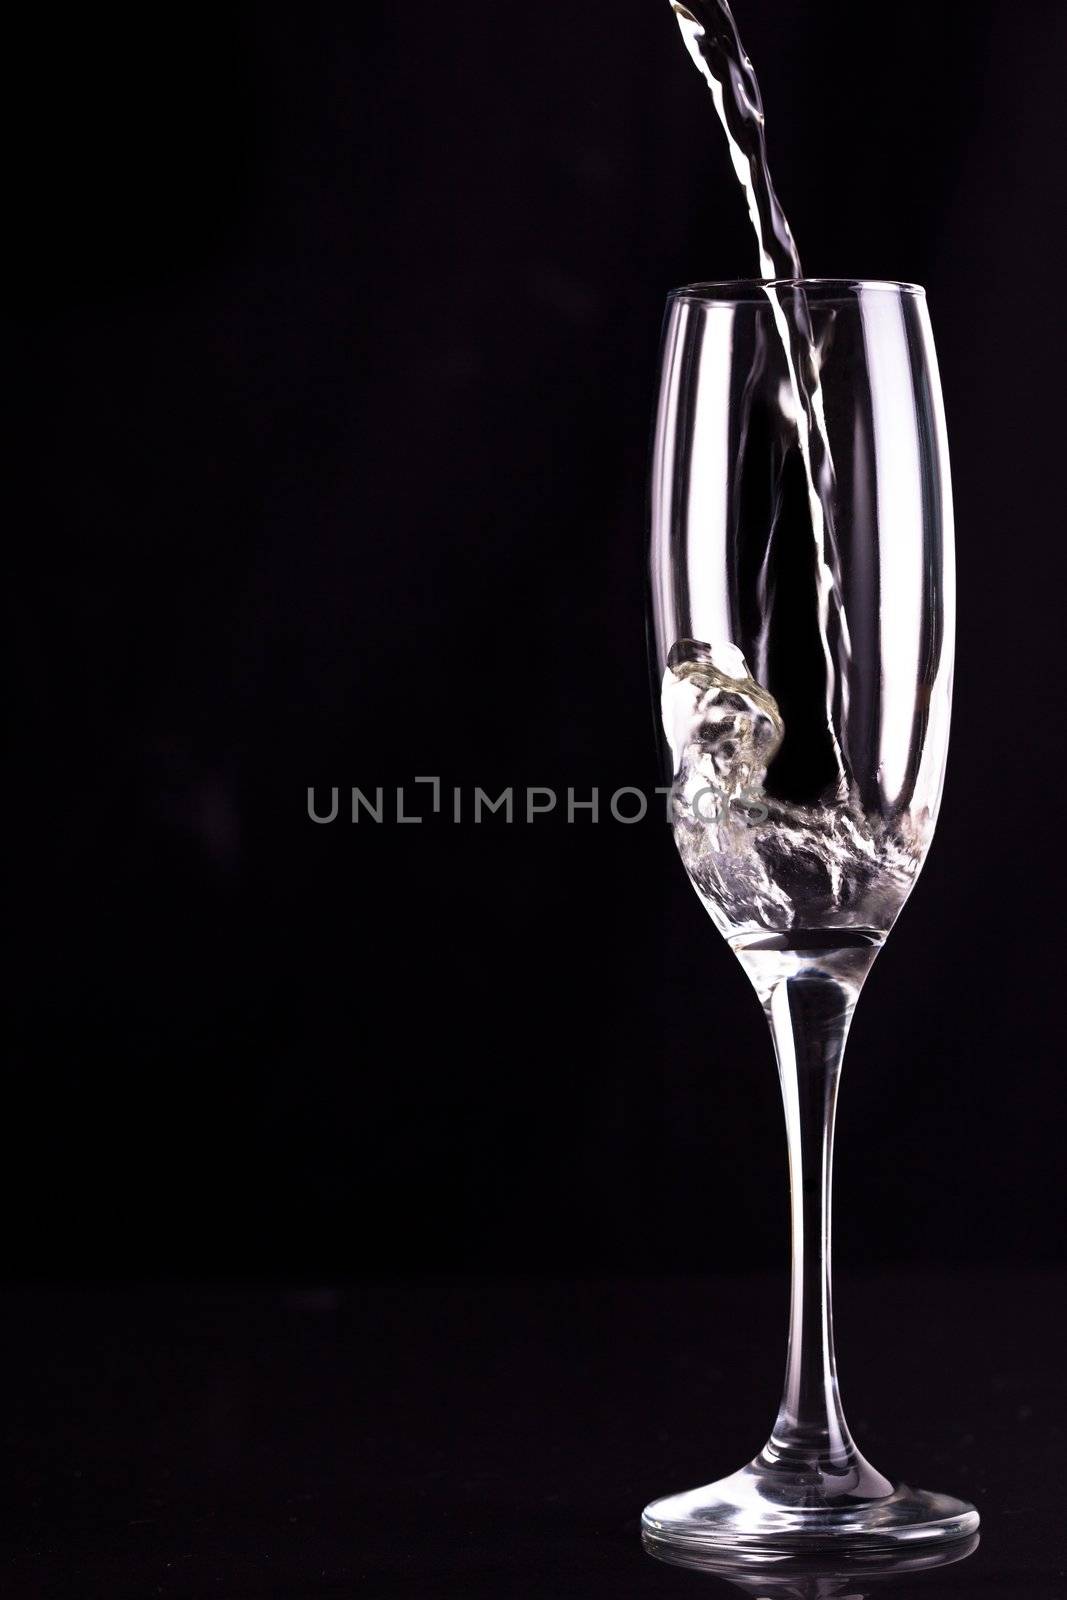 Empty champagne flute being filled by Wavebreakmedia